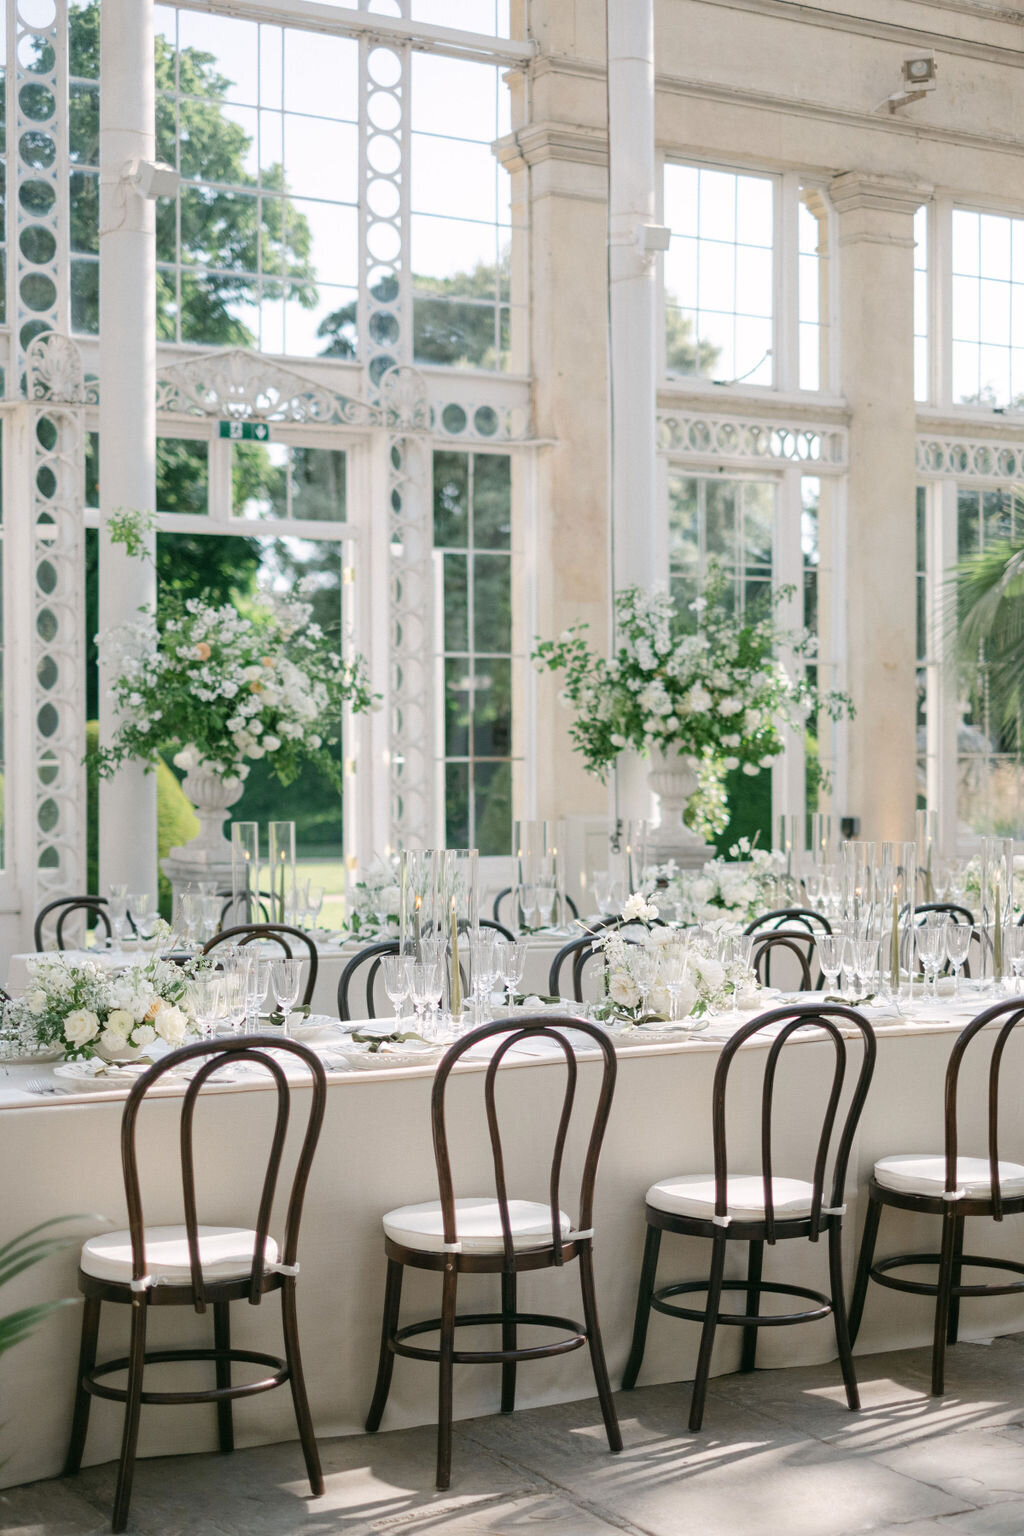 Attabara Studio UK Luxury Wedding Planners at Syon Park & with Charlotte Wise0760